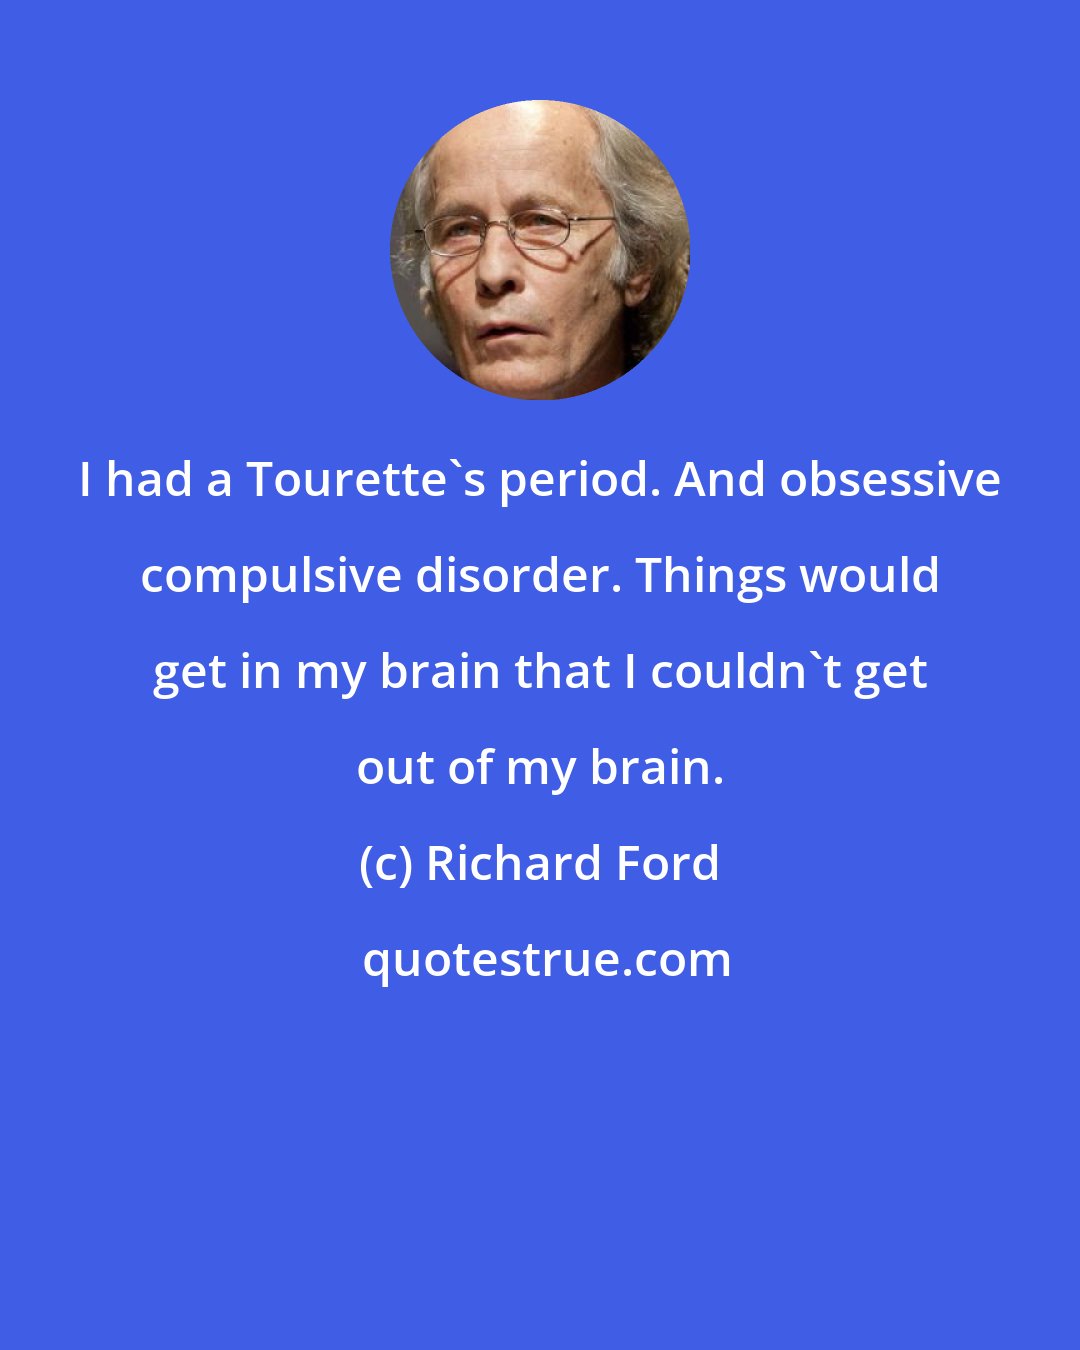 Richard Ford: I had a Tourette's period. And obsessive compulsive disorder. Things would get in my brain that I couldn't get out of my brain.